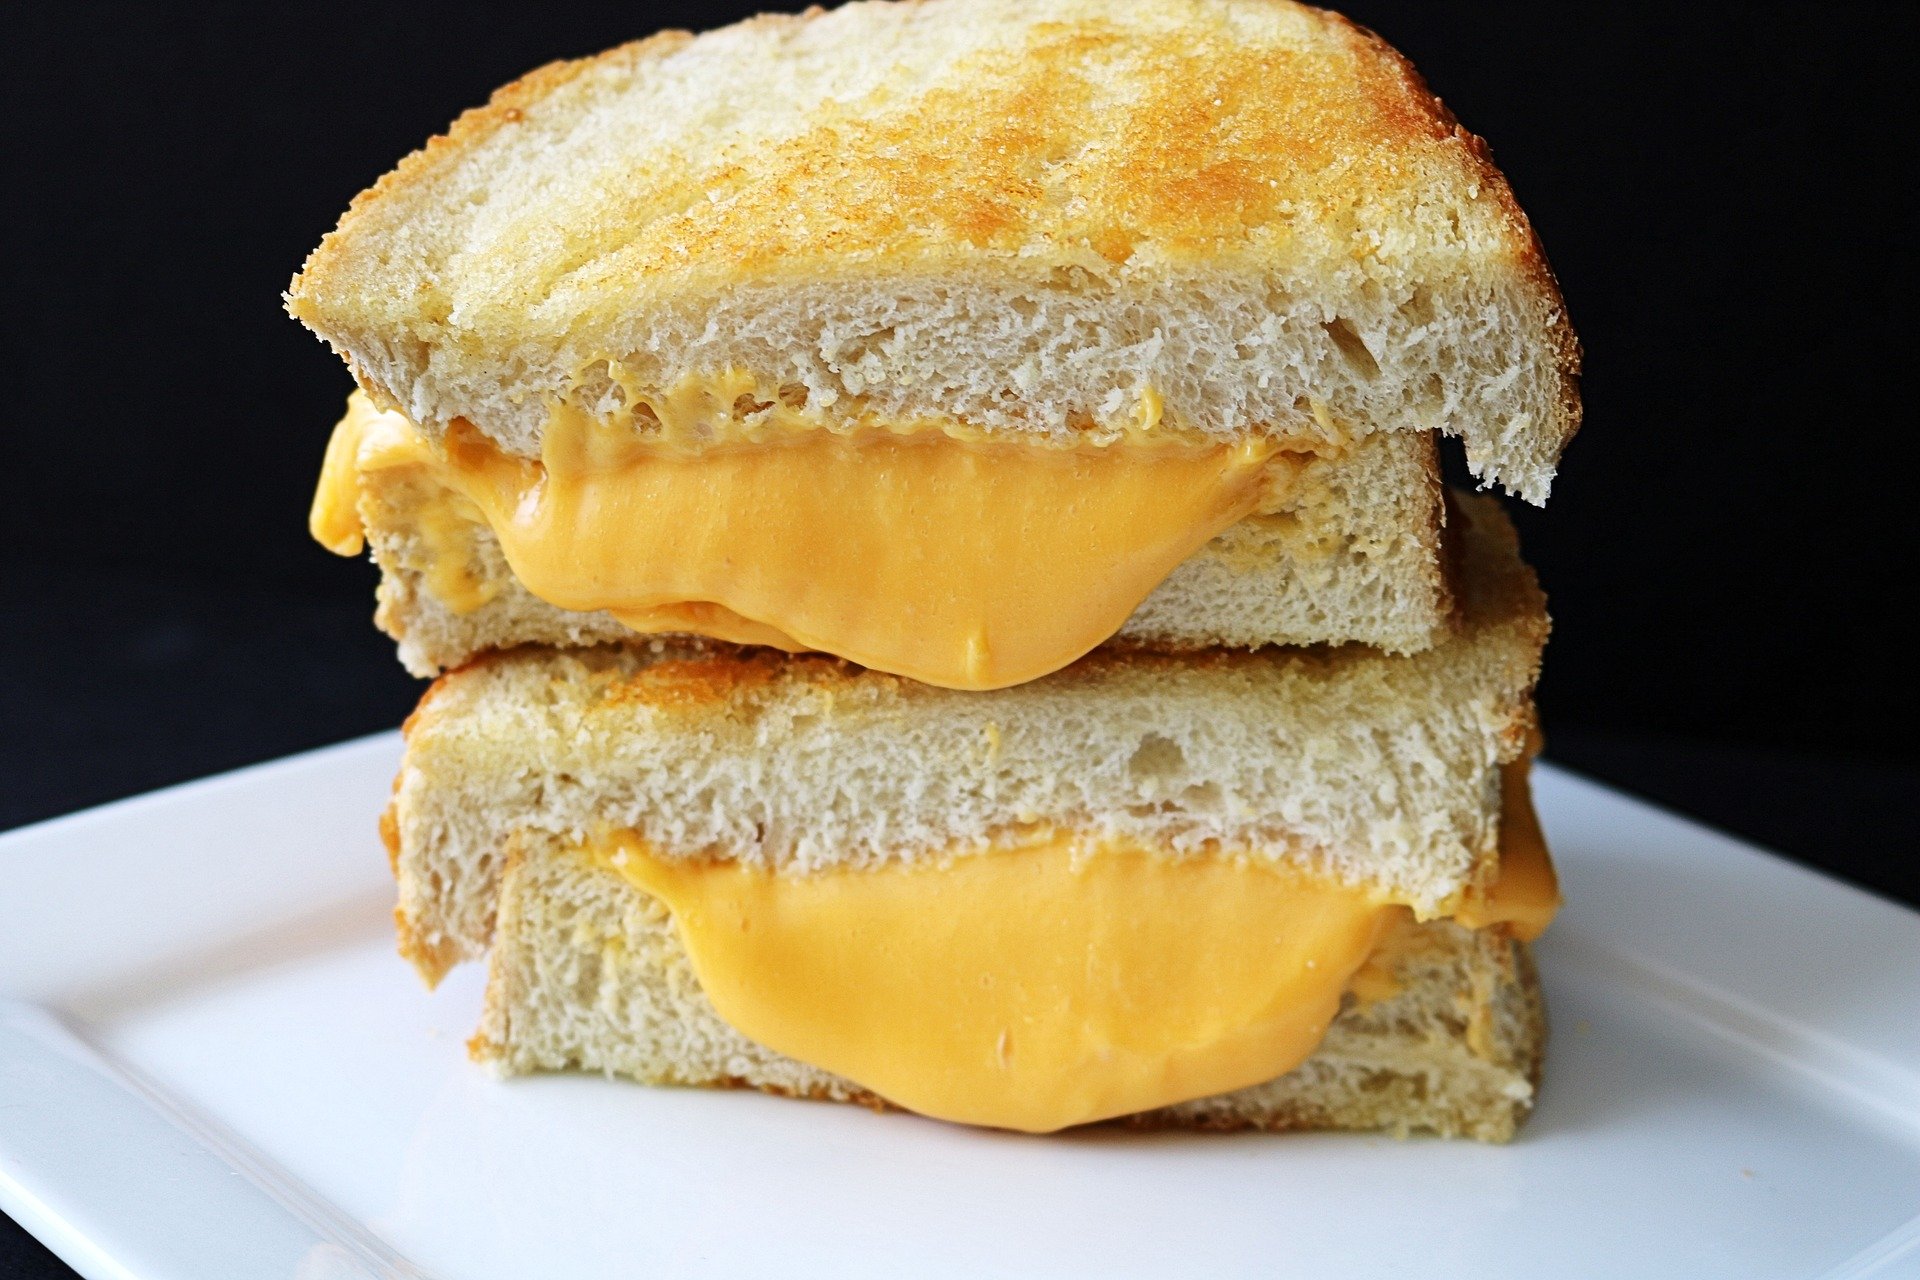 National Grilled Cheese Day